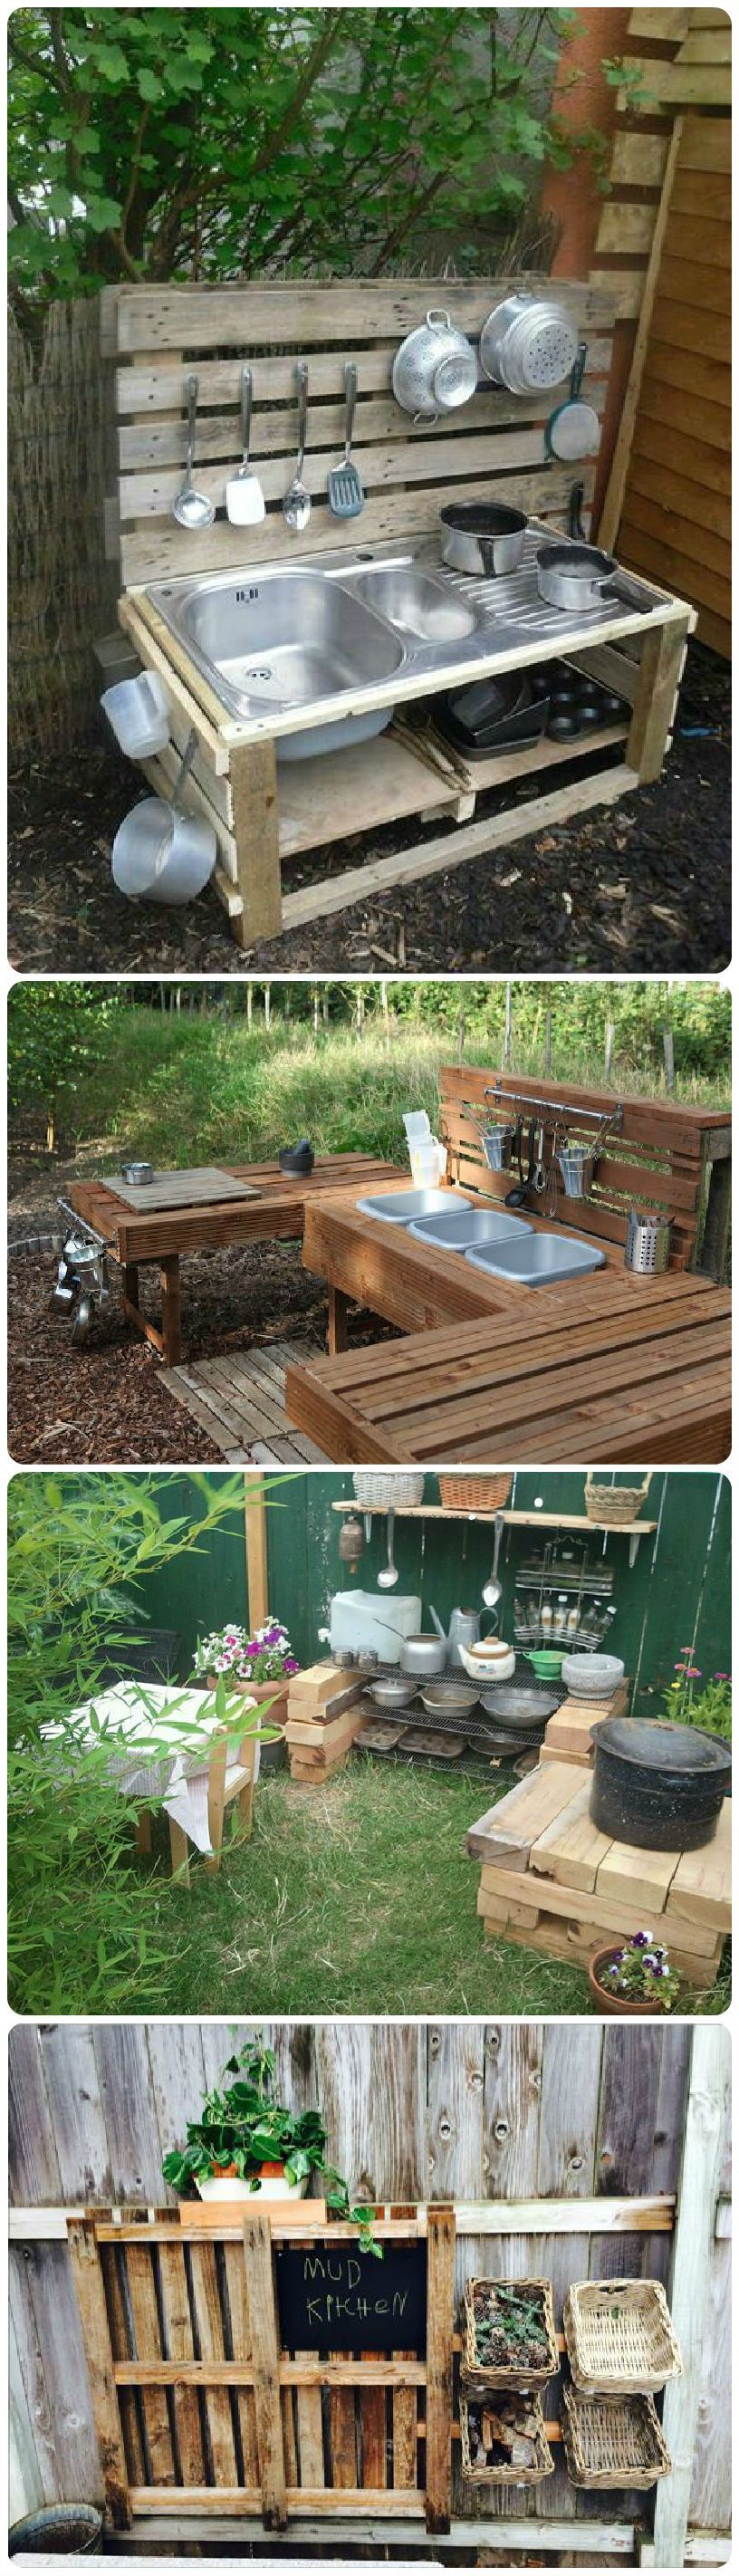 Mud kitchens (also known as outdoor kitchens or mud pie kitchens) are one of the best resources for little ones to play outside.